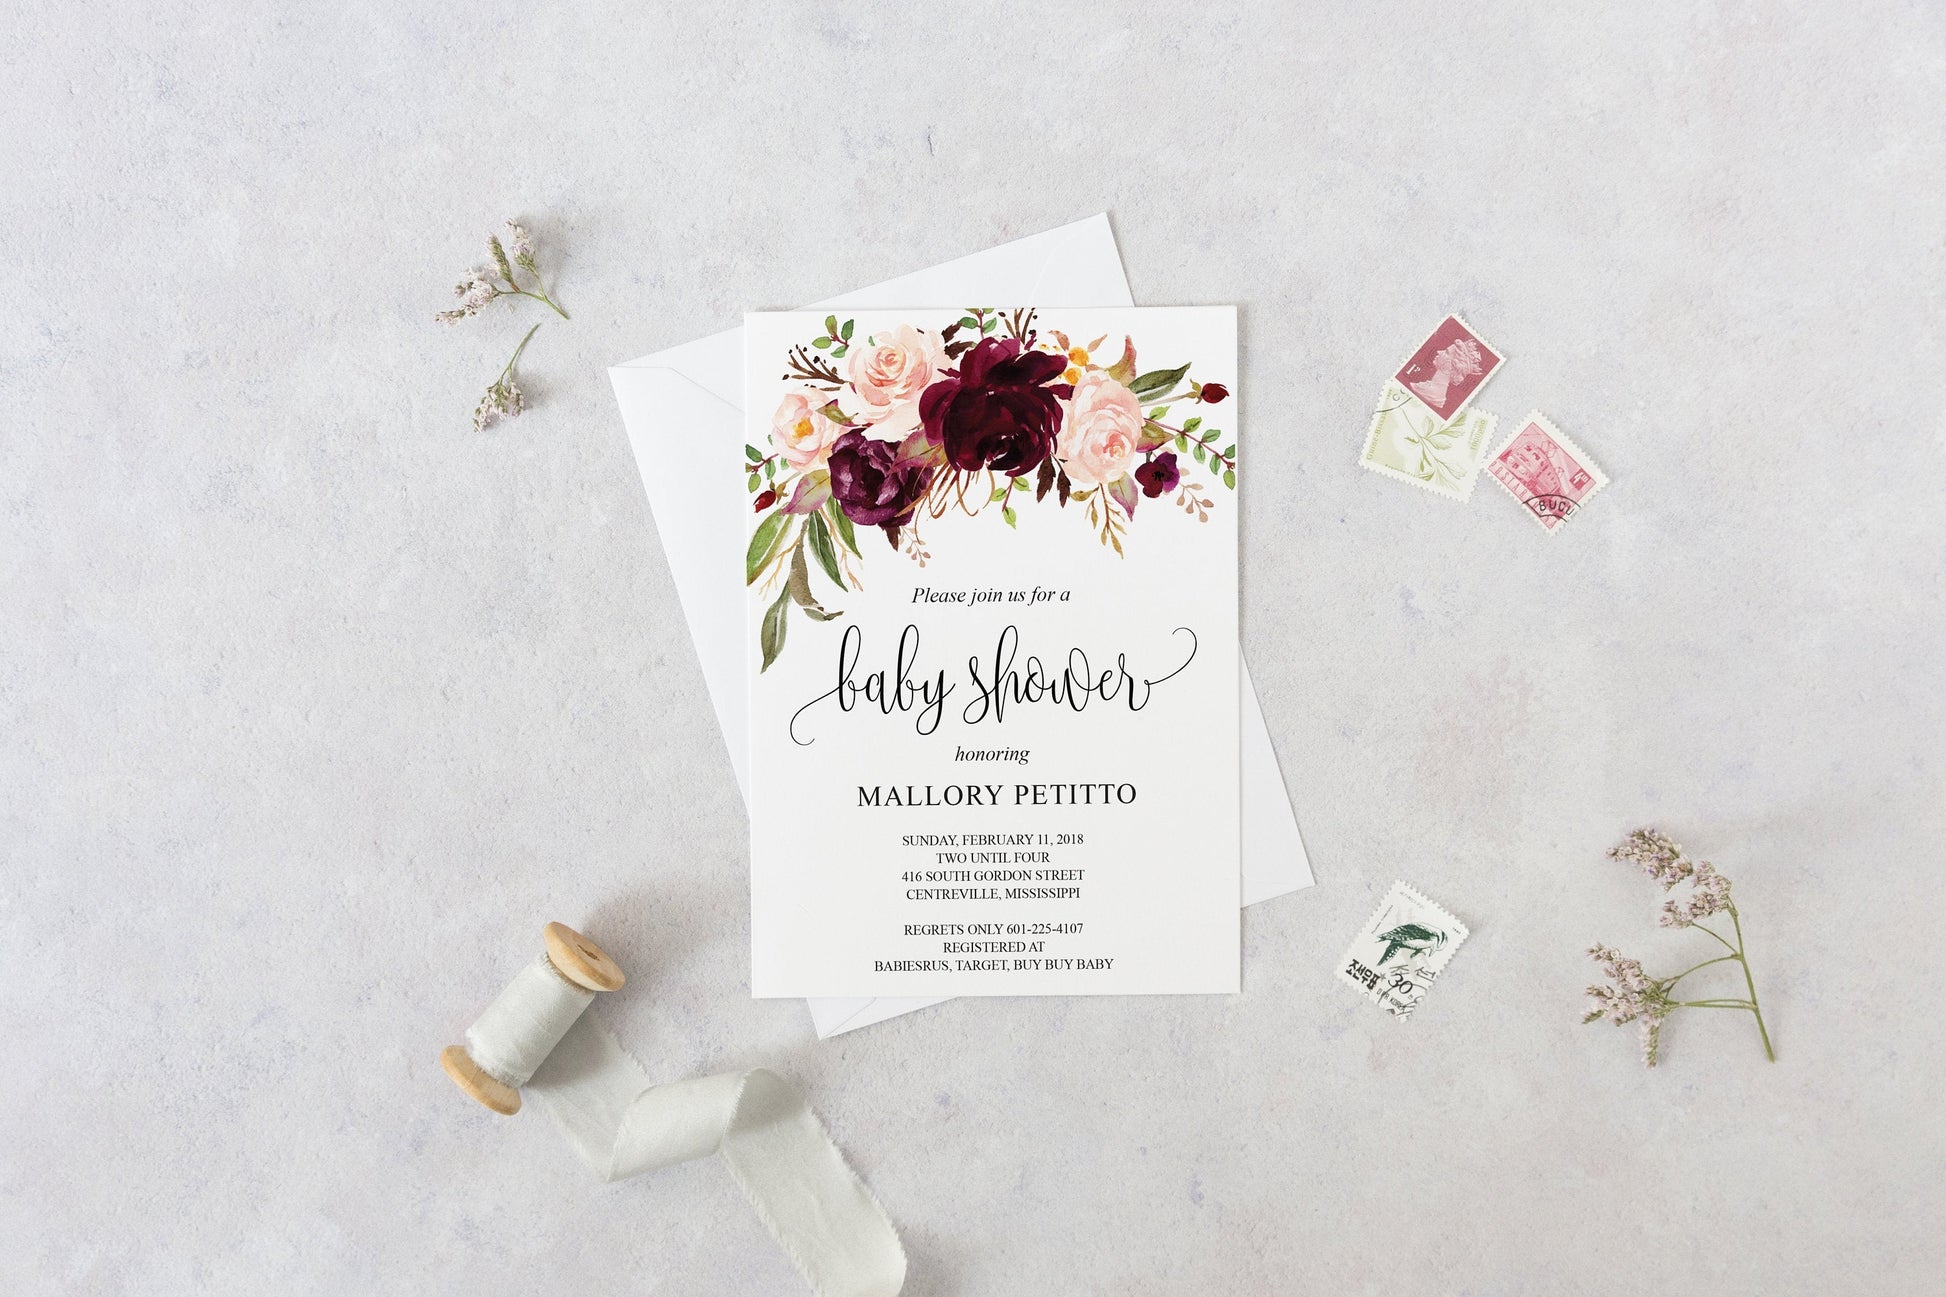 Printable Baby Shower Invitation Template, Baby Shower invite, Burgundy, Floral, Invitation, Baby Shower Invites - MPU78  SAVVY PAPER CO